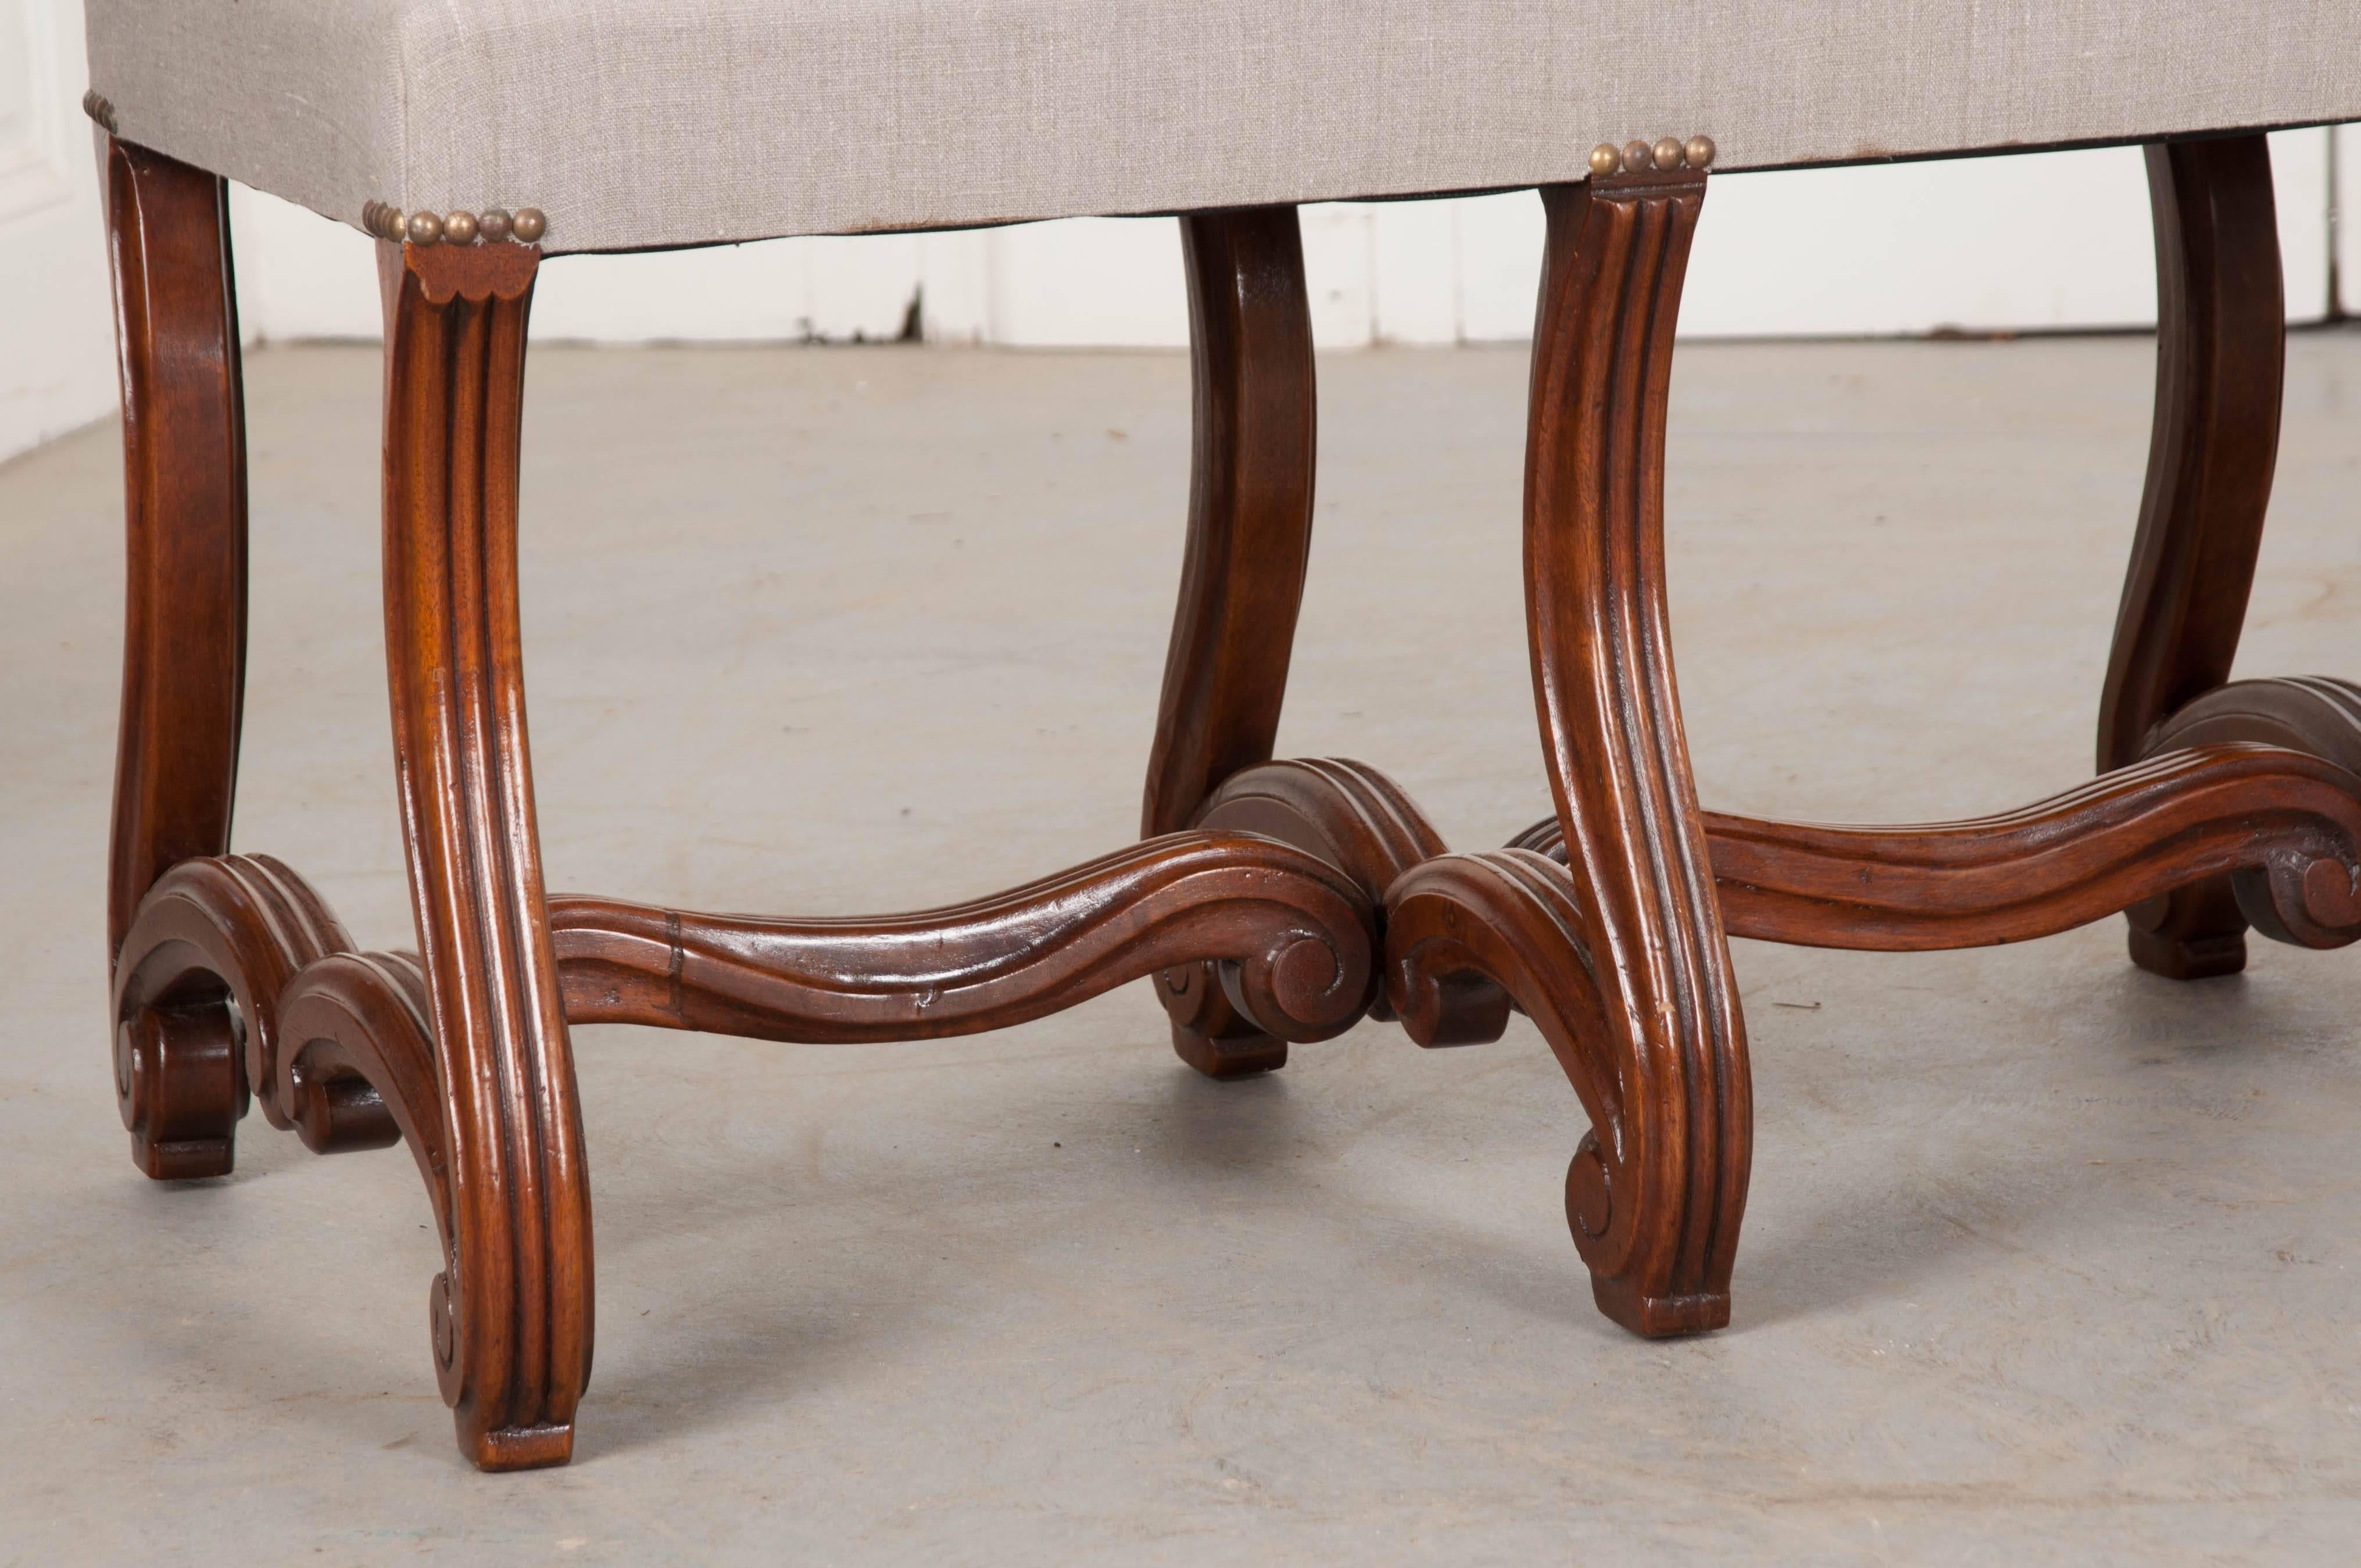 A fine pair of French 19th century Louis XIV style mahogany benches, upholstered in a taupe or grey linen that is affixed to the base with antiqued brass nail heads at each leg. The exceptionally well-carved bases give this pair their exceptional